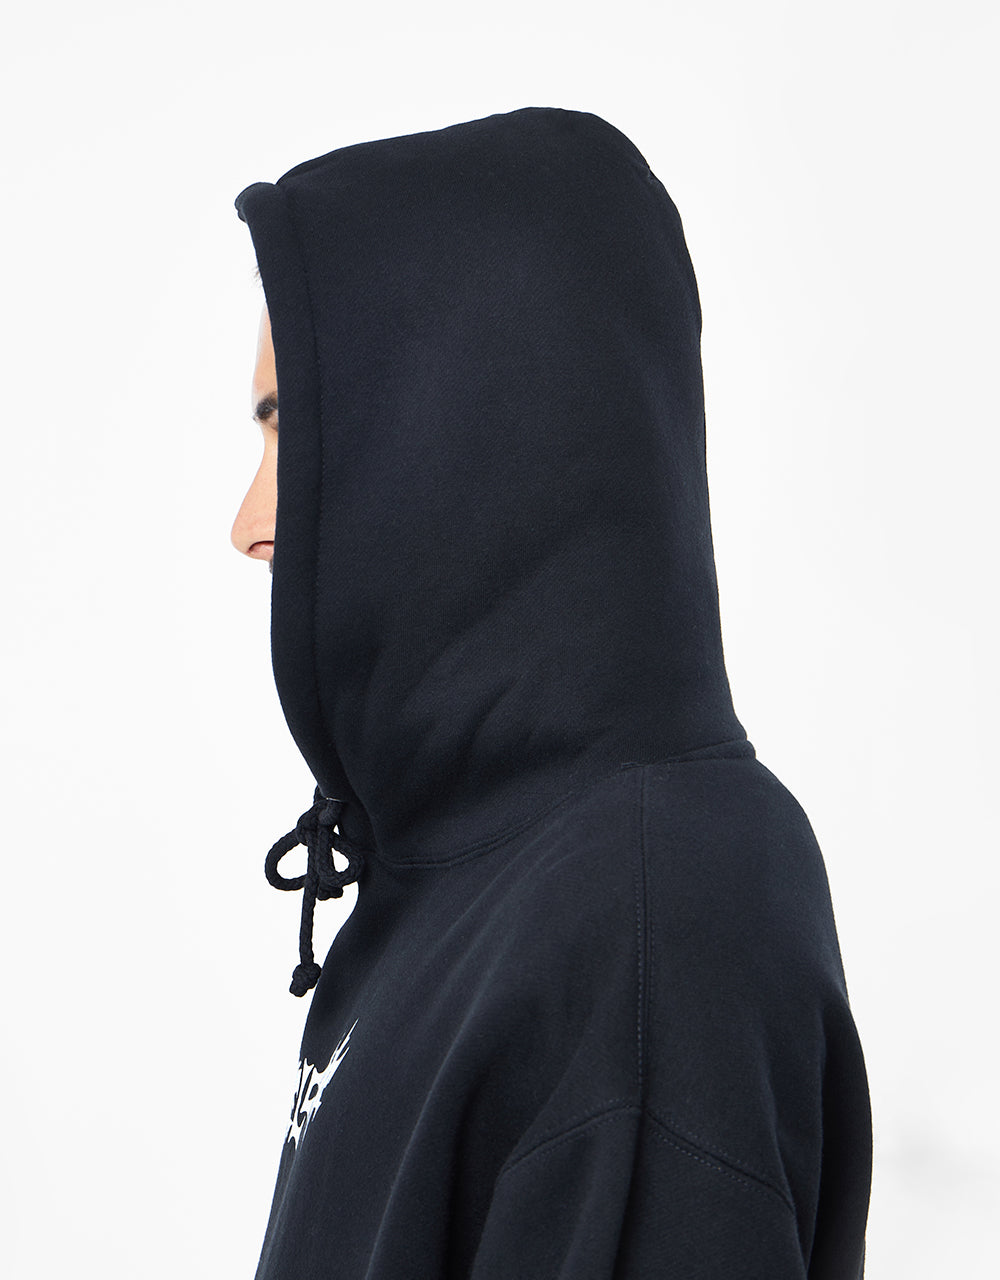 Welcome Bapholit Pullover Hoodie - Black/Red